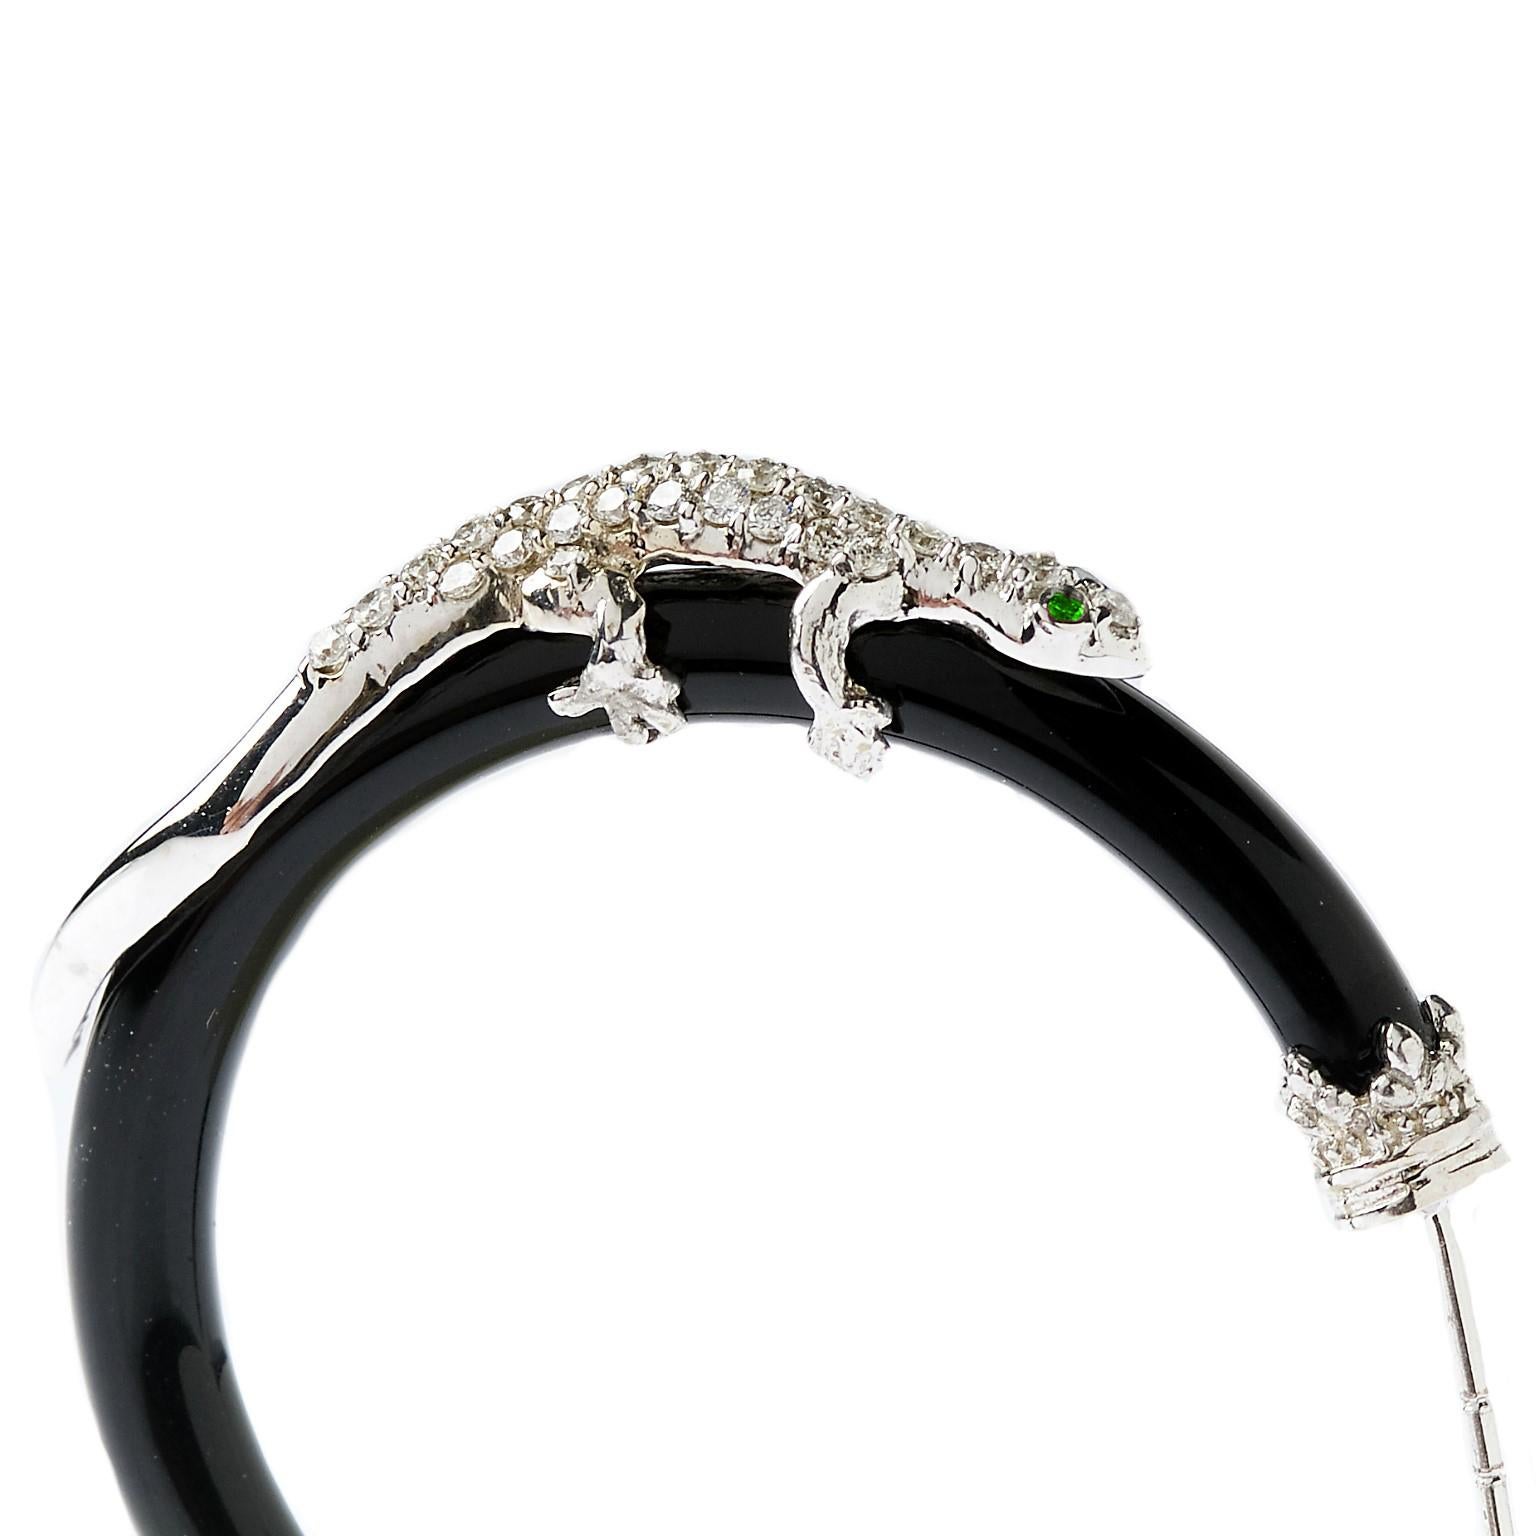 Stambolian 18K White Gold Diamond Black Onyx Tsavorite Lizard Hoop Earrings

These stunning earrings feature two lizards that sit on top of Onyx hoops all done in diamonds. 

0.78 carat G color VS clarity white diamonds are set throughout the entire